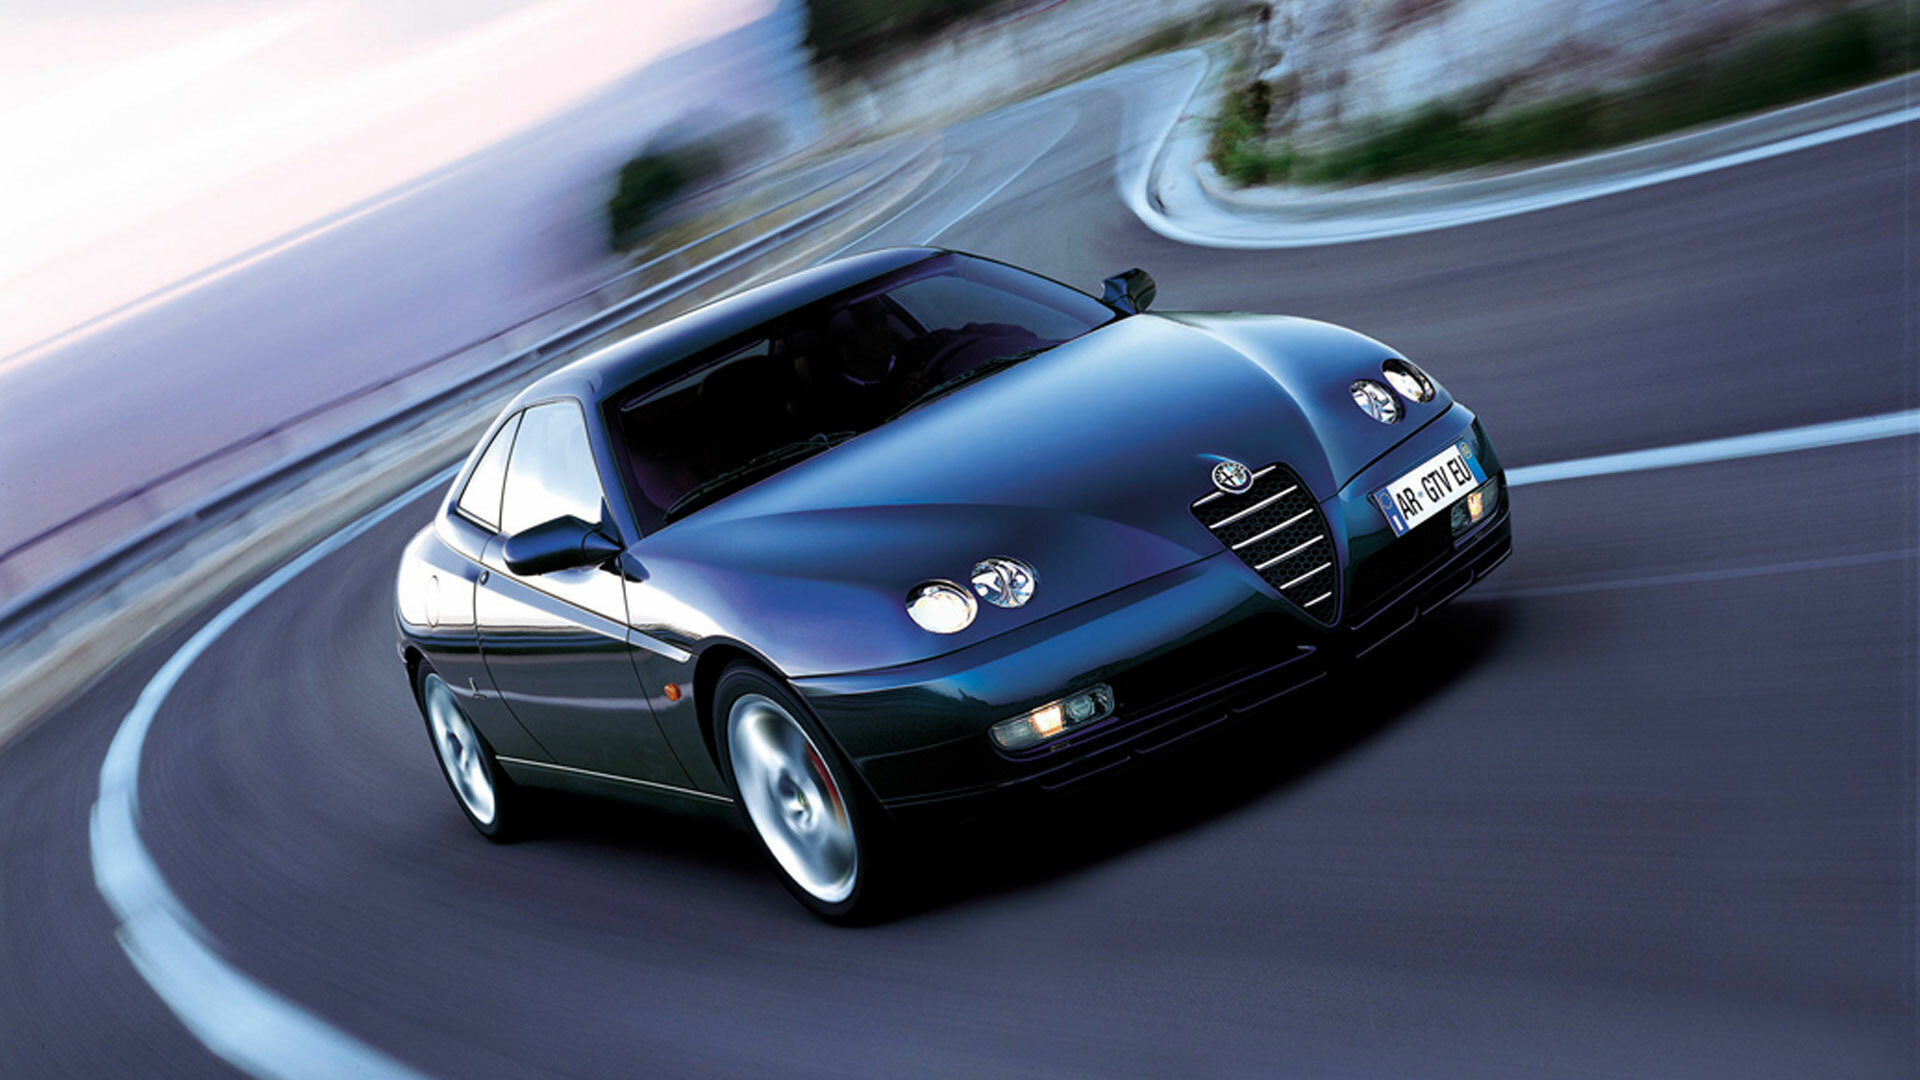 Alfa Romeo Doesn't Want To Become An SUV Brand, CEO Hints At New GTV